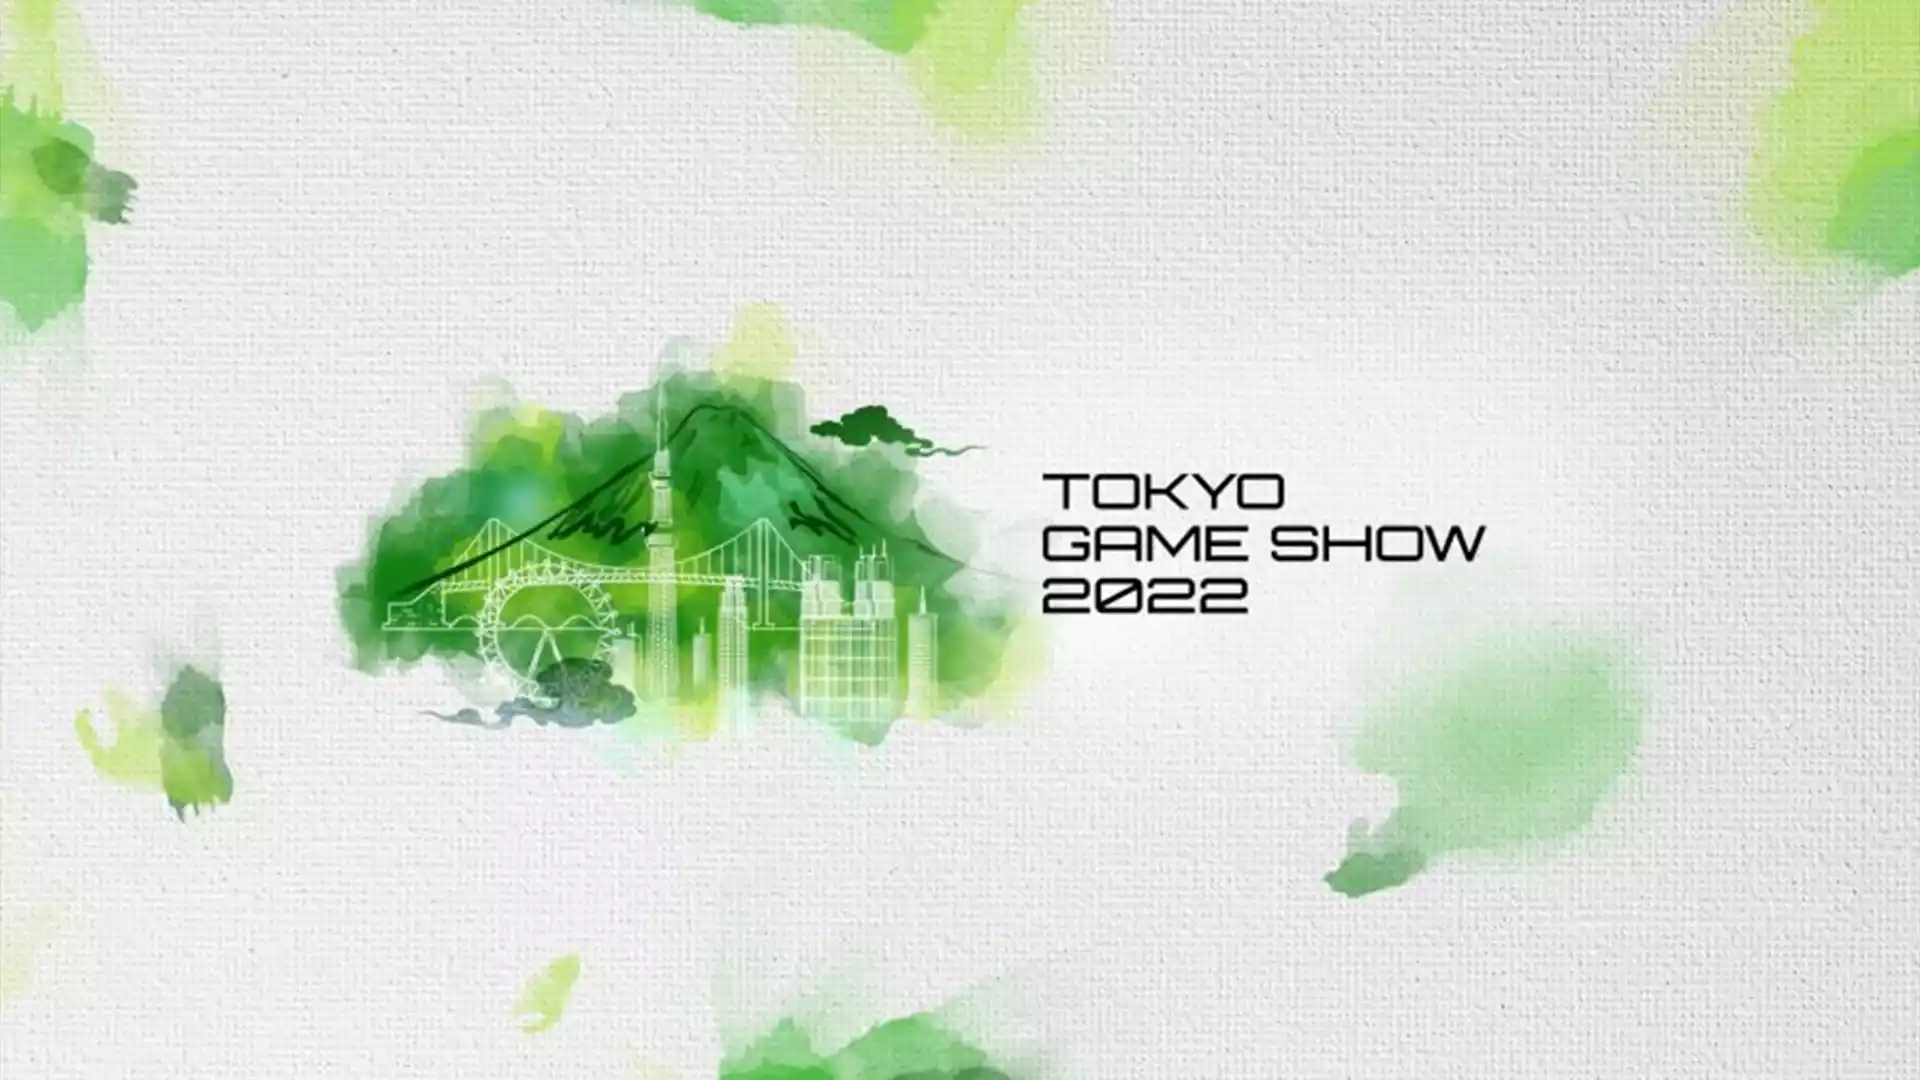 Tokyo Game Show Xbox 2022 News and updates on 22 upcoming games